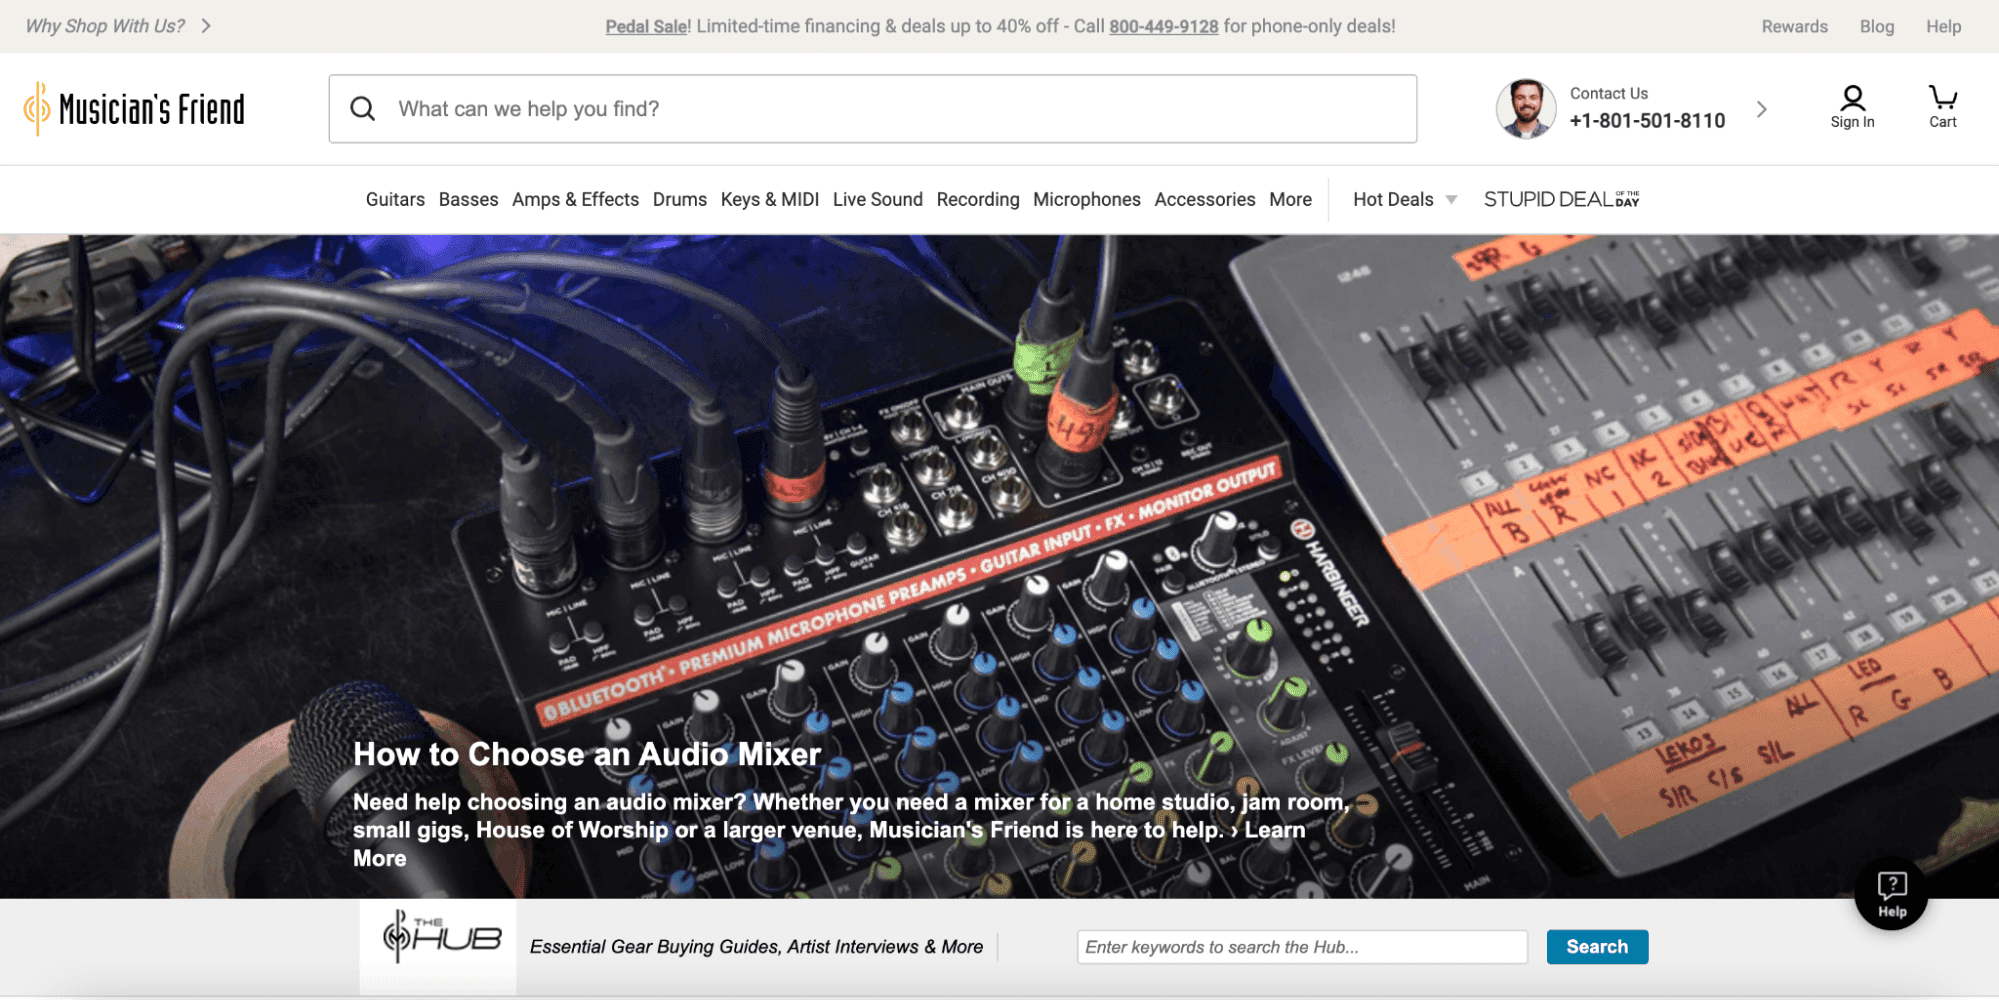 example blog post from the Musician's Friend blog: "How to Choose an Audio Mixer"